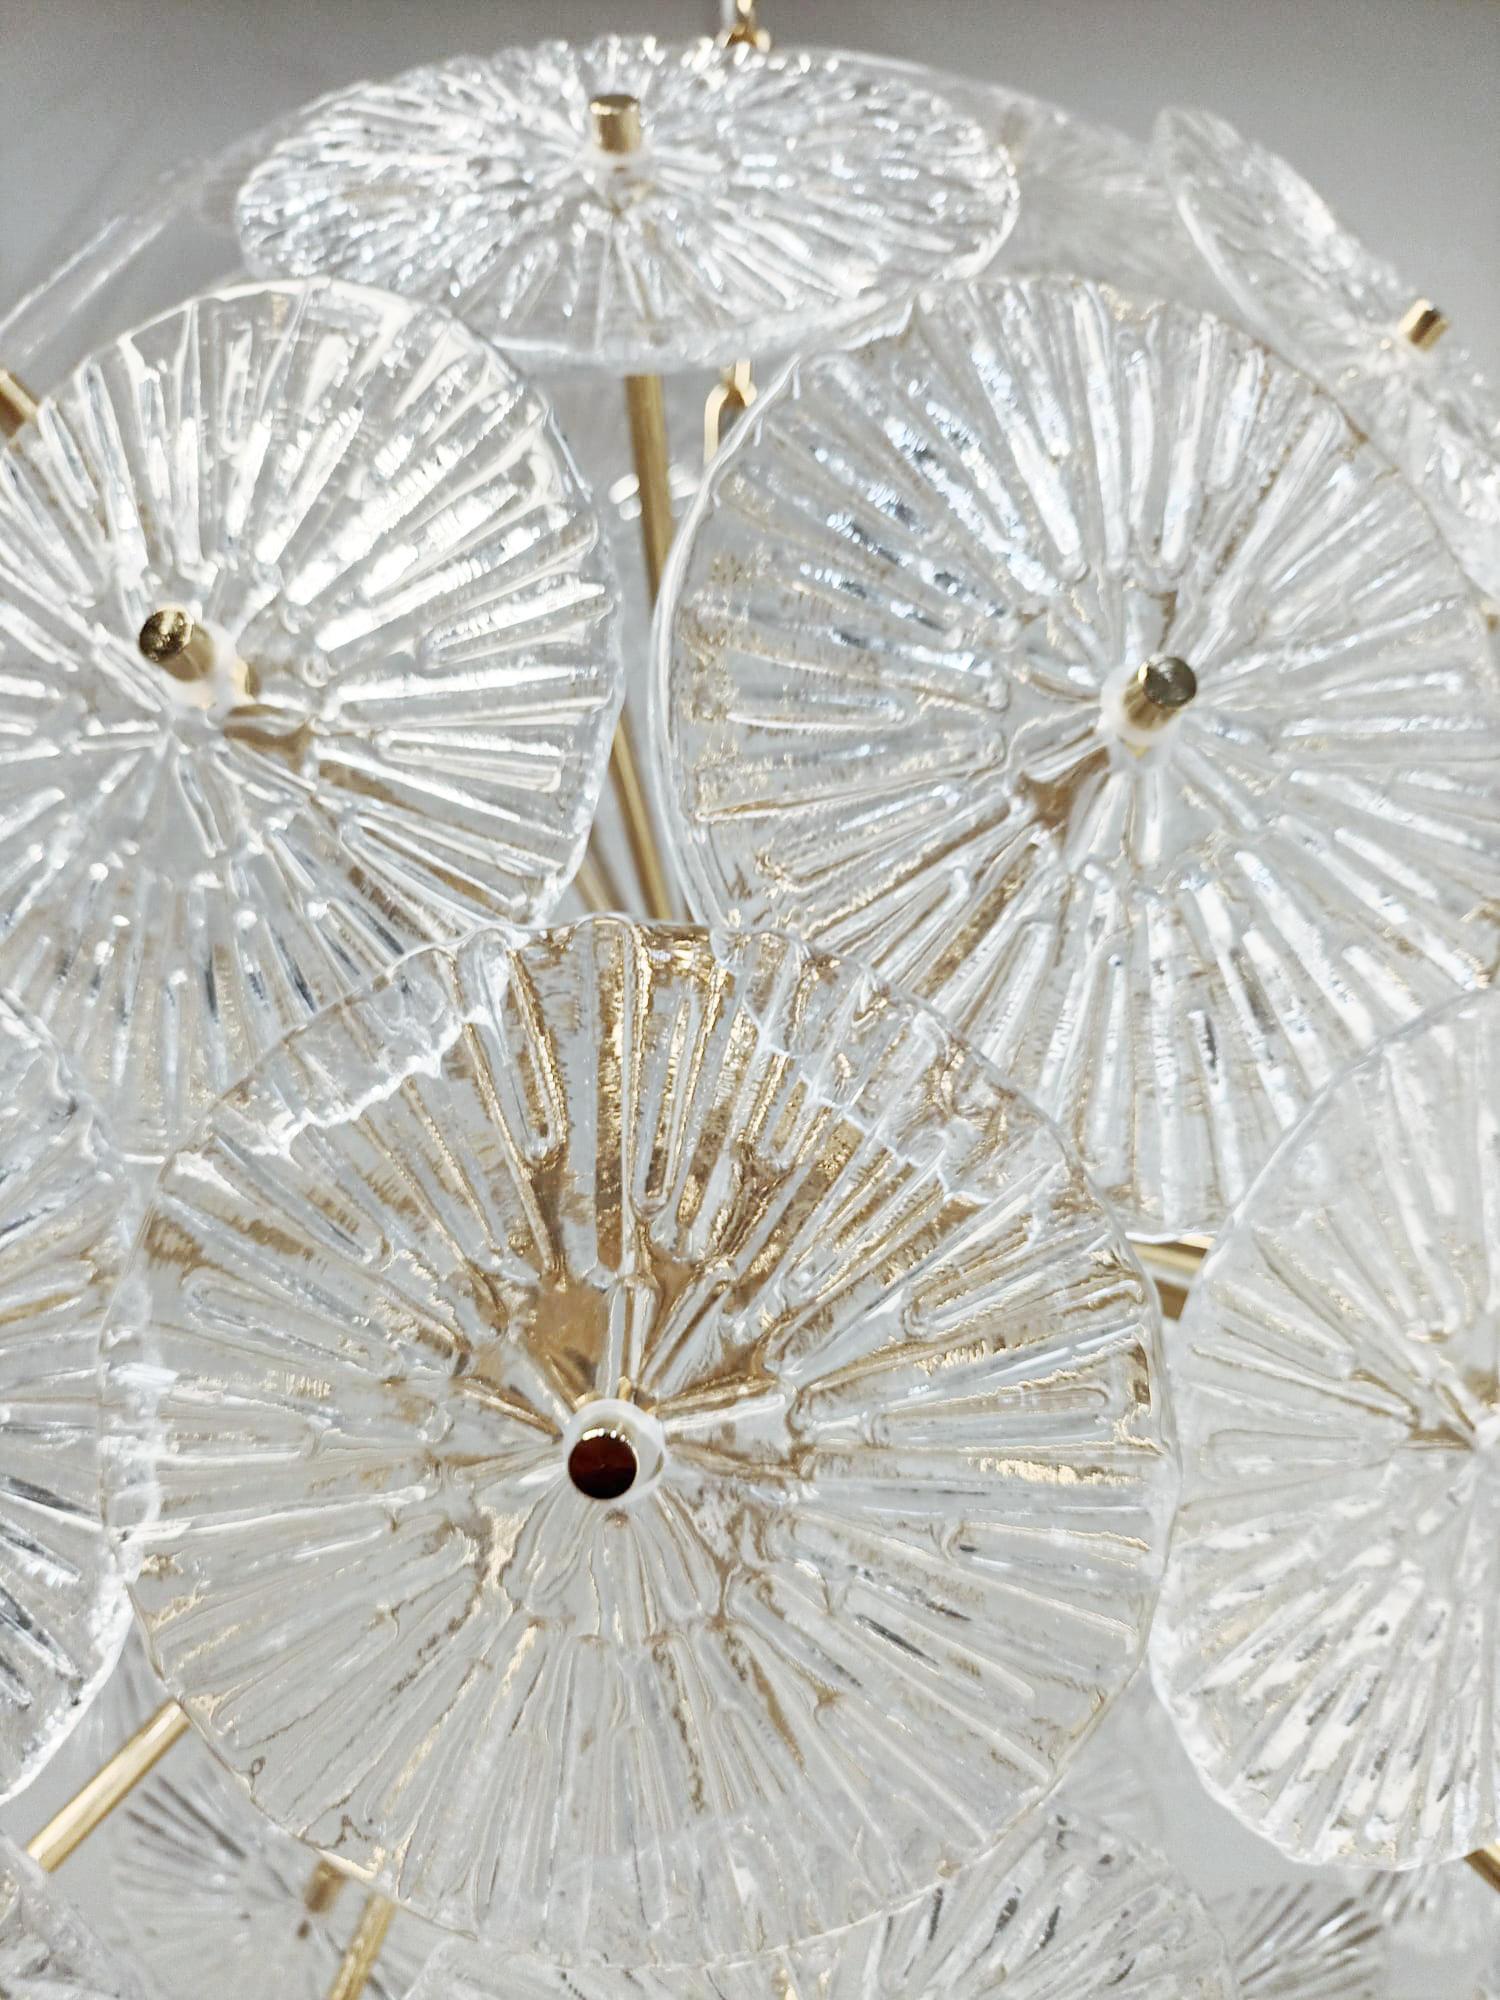 Loto Sputnik Chandeliers by Fabio Ltd - 2 Available In New Condition For Sale In Los Angeles, CA